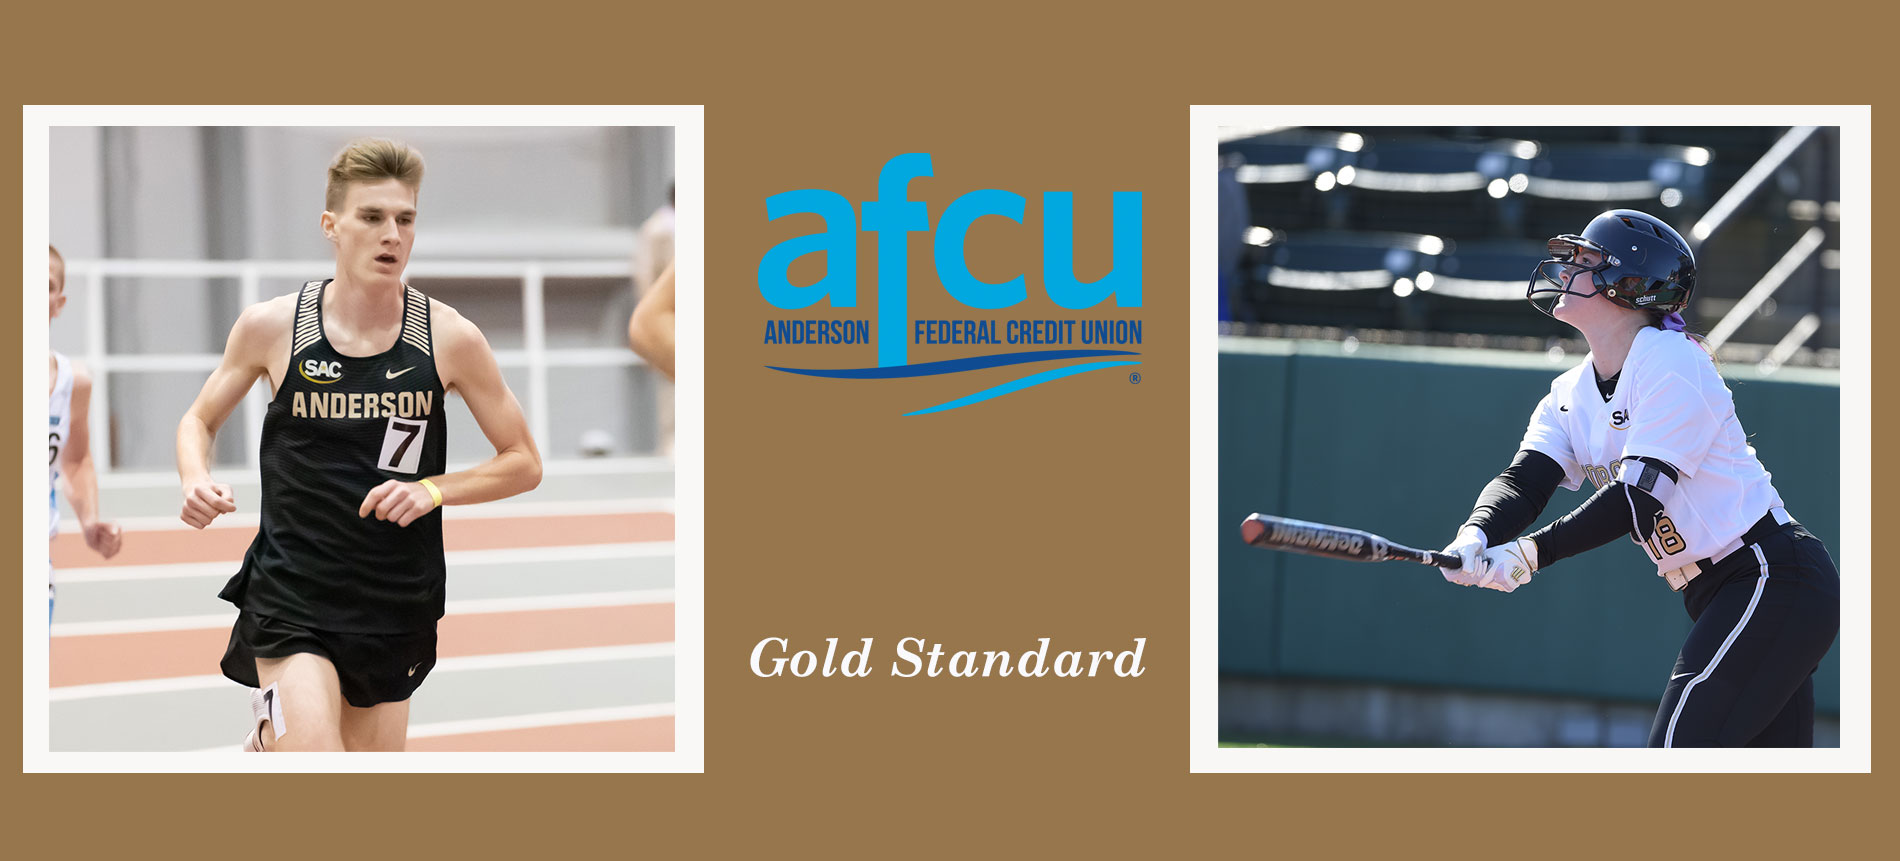 Softball’s Kayson Boatner and Men’s Track’s Philip Quillen Named to the AFCU Gold Standard